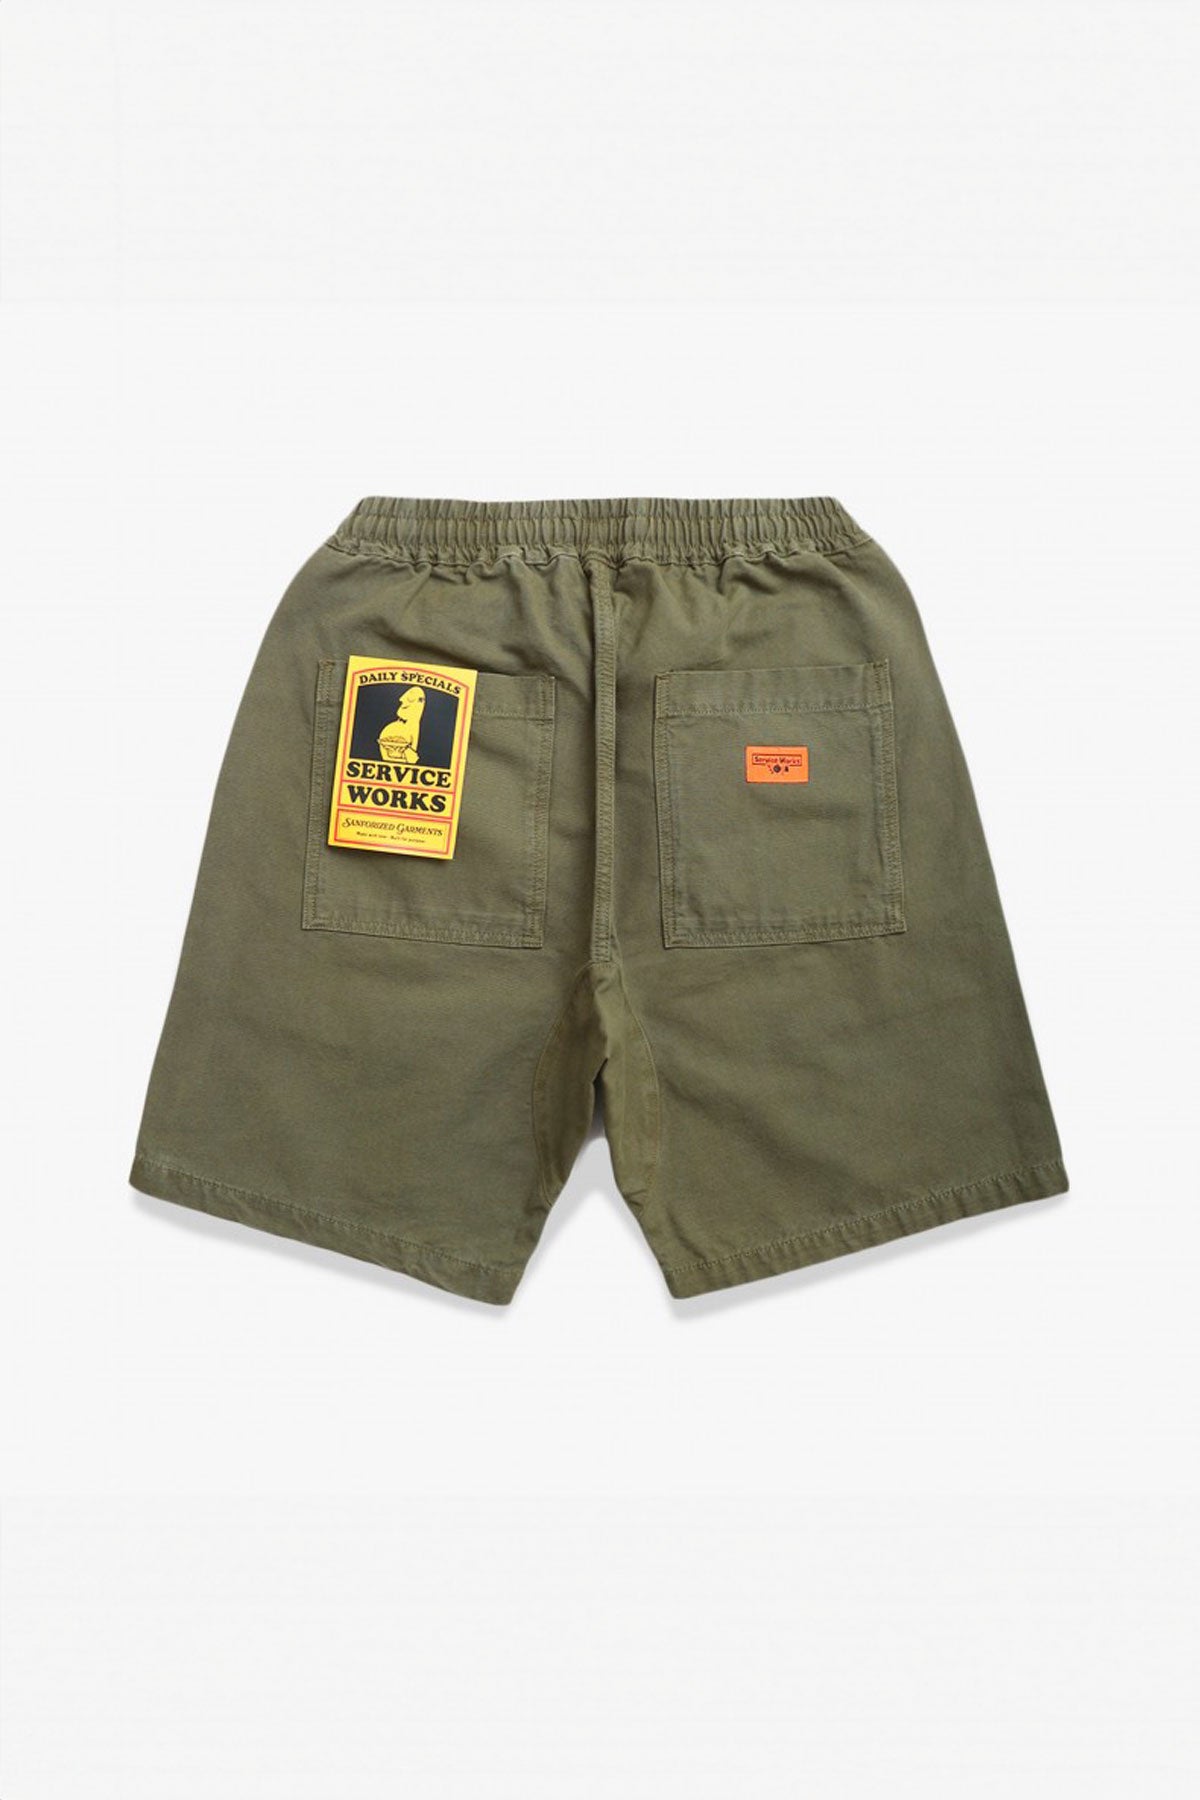 Service Works - Classic Canvas Chef Shorts in Olive